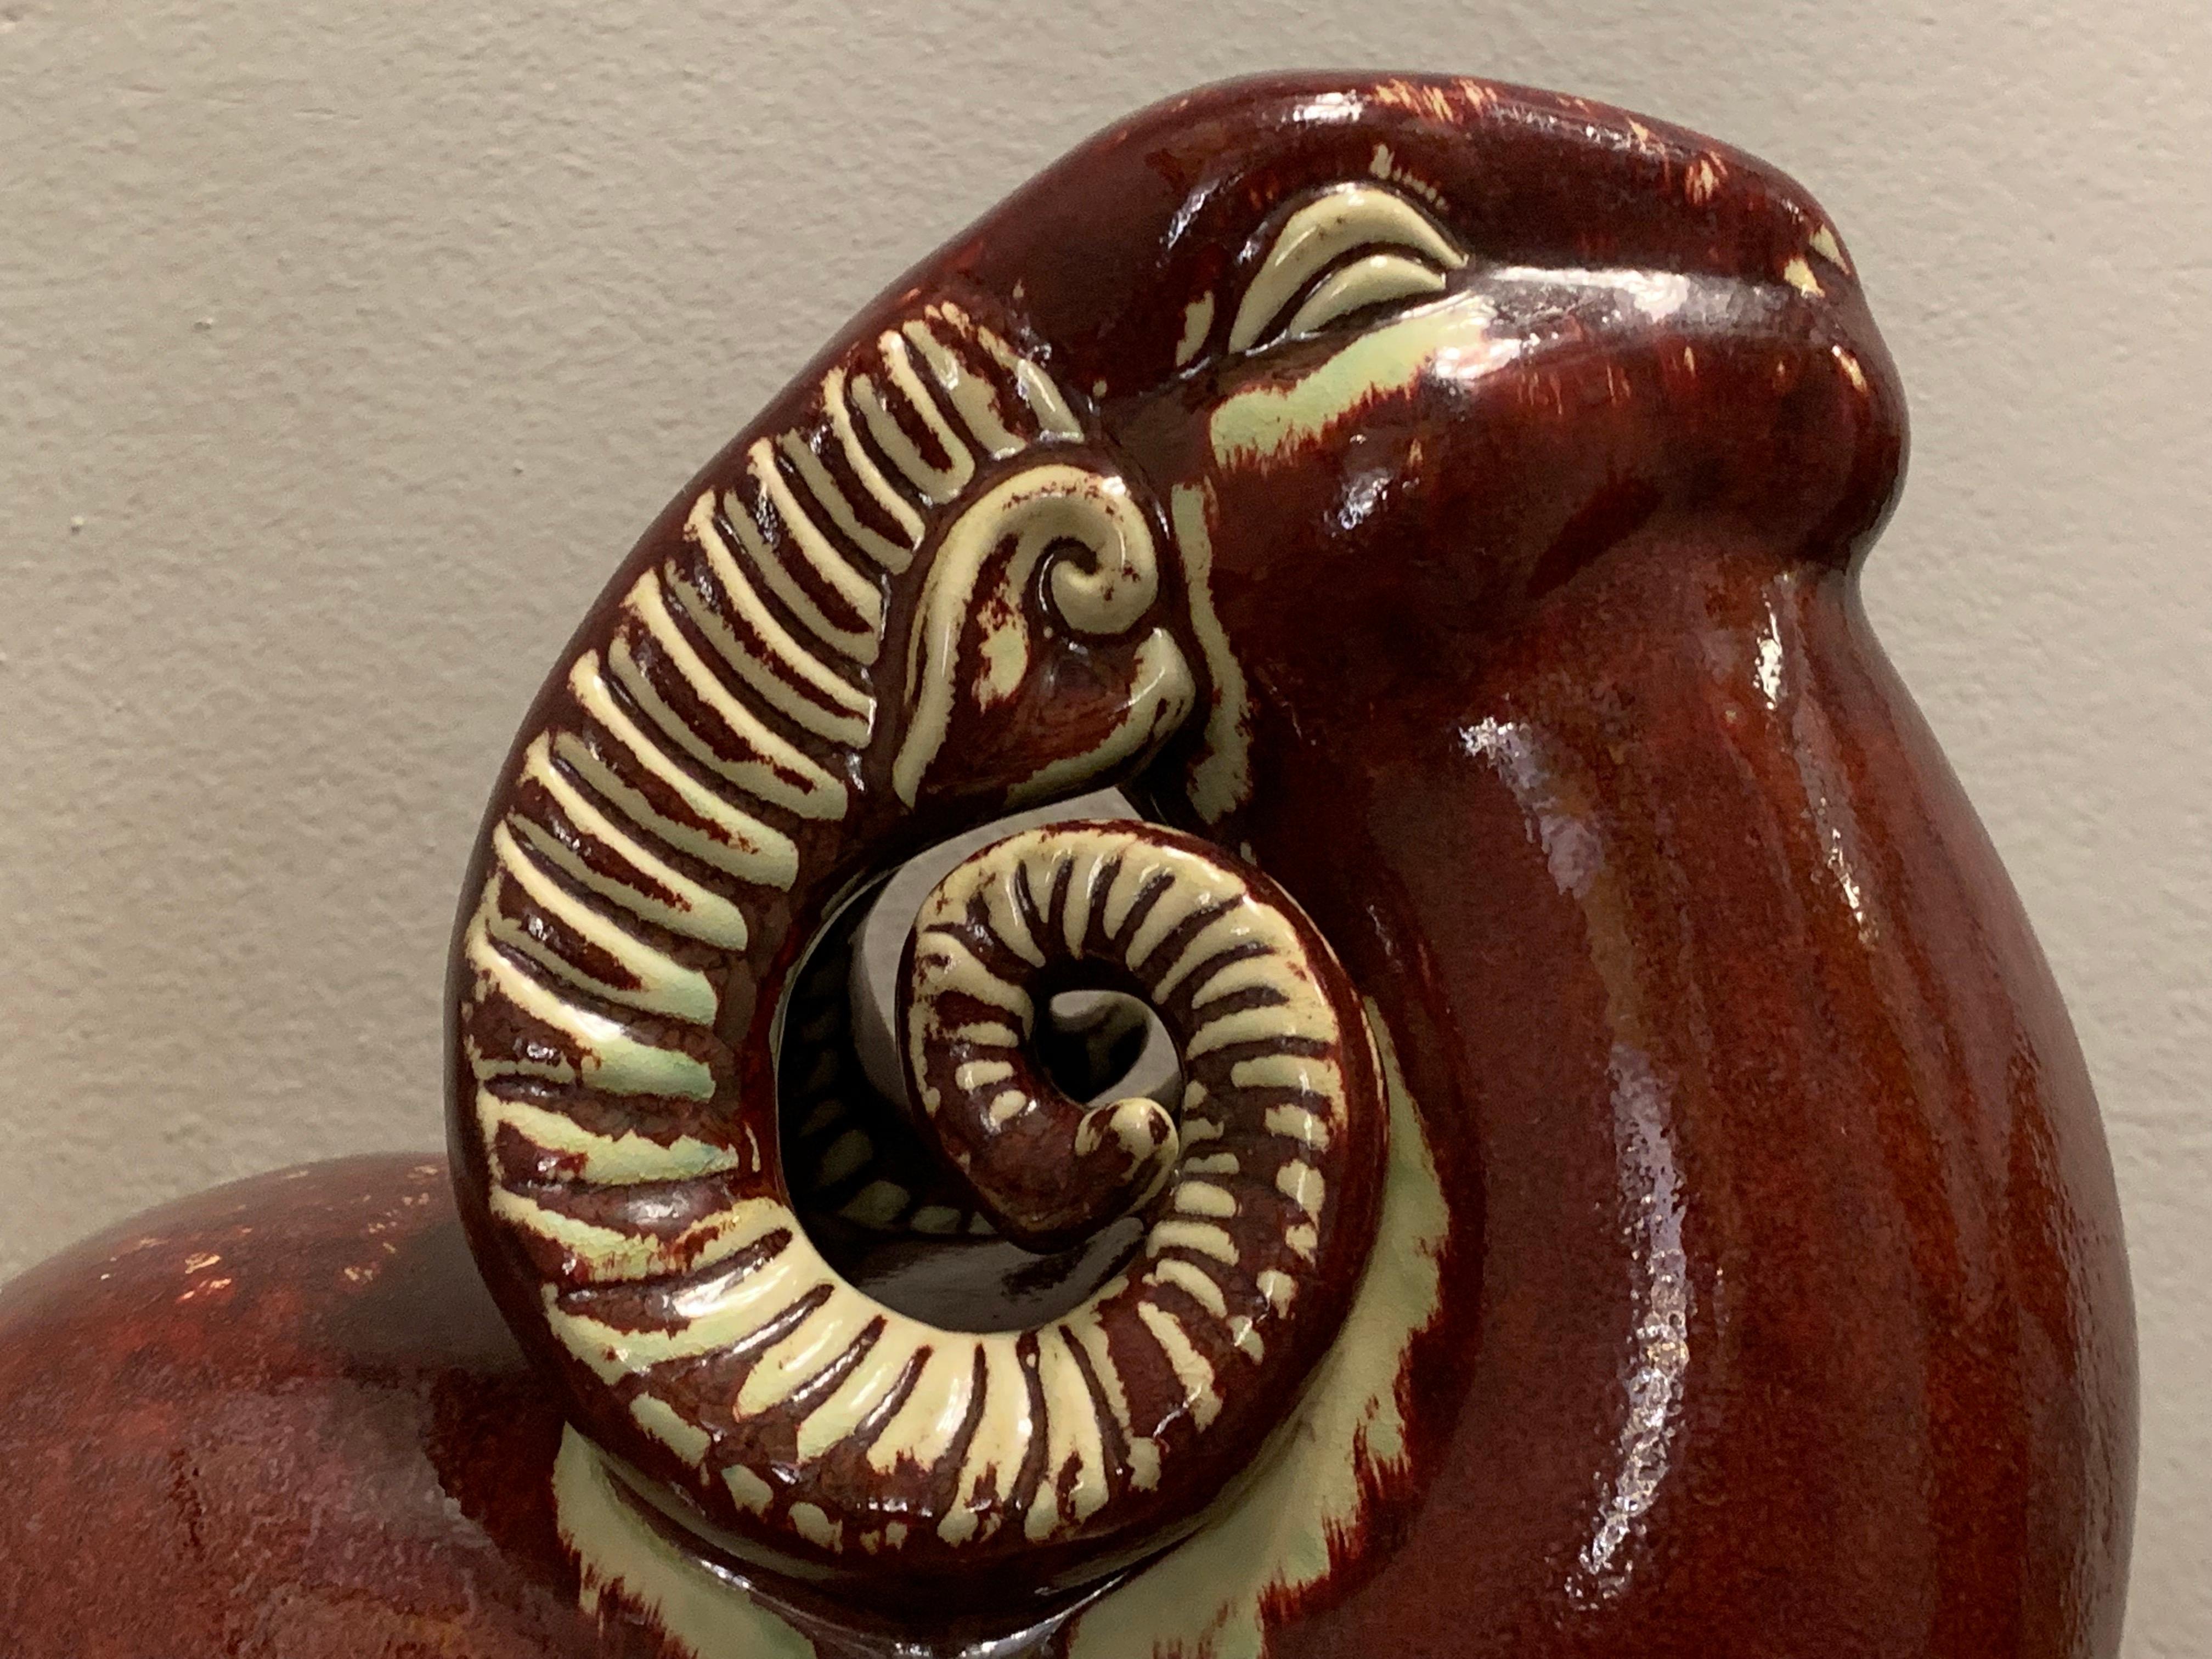 Large vintage Italian ruby red and off-white ceramic decorative glazed ram. The Ram's head is bowed backwards as though it's about to go into battle or is being challenged. The ram's horns are beautifully sculpted and highlighted in white to